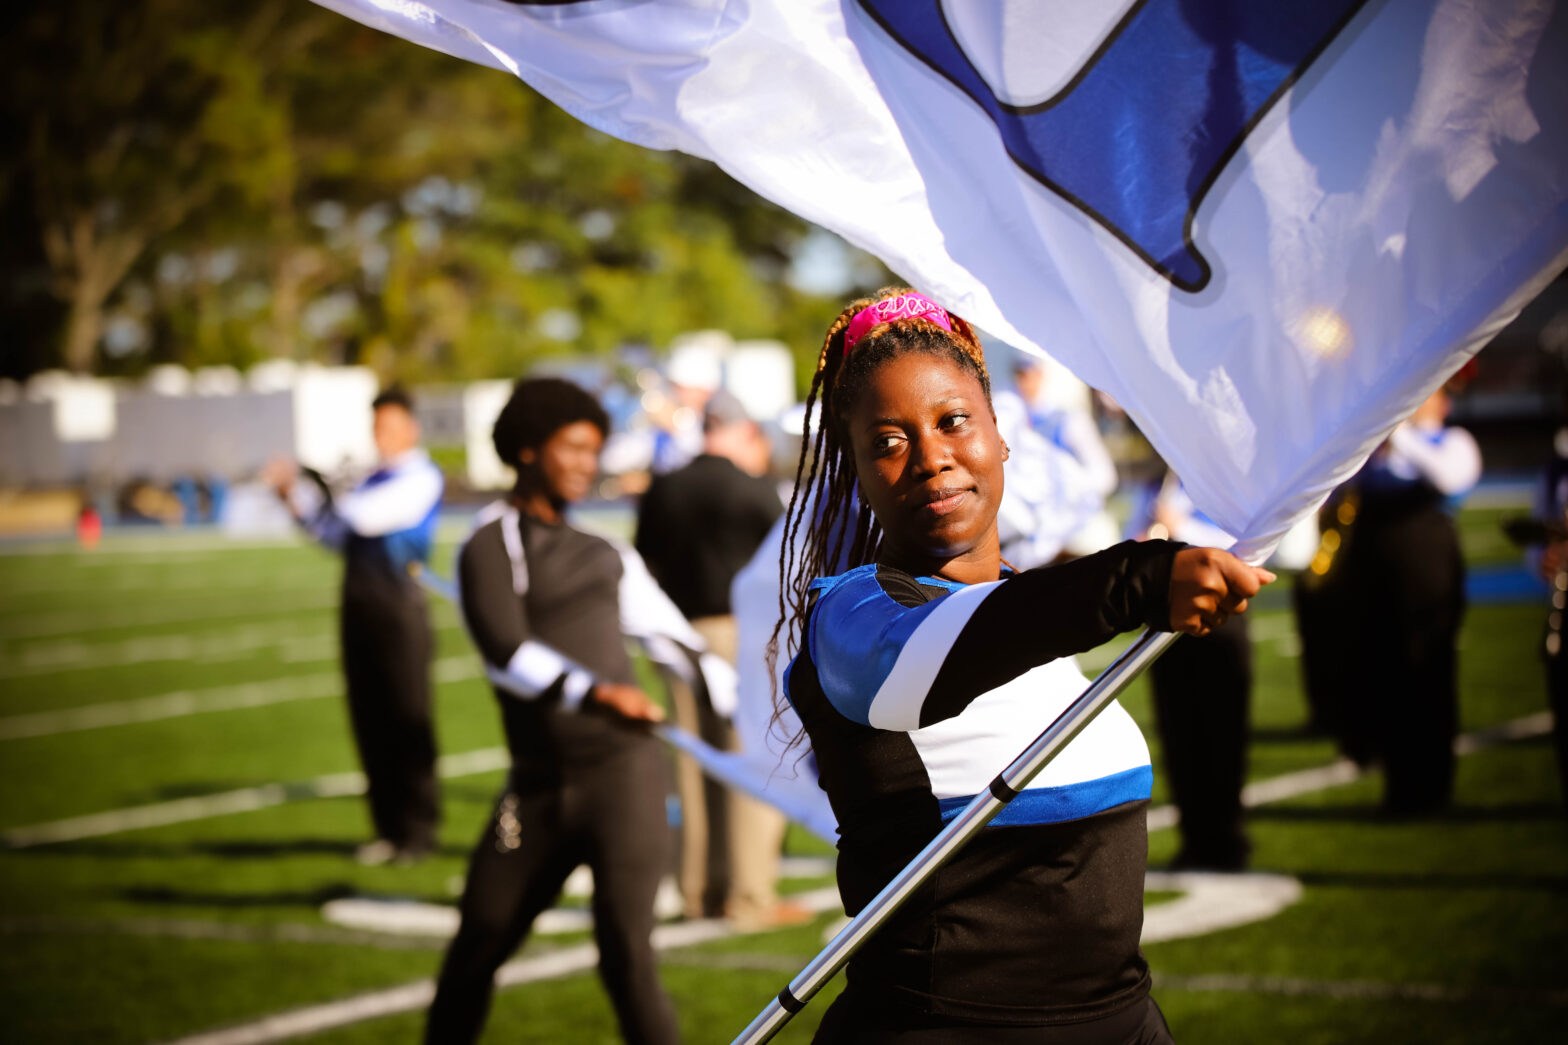 Featured image for post: Barton Bands